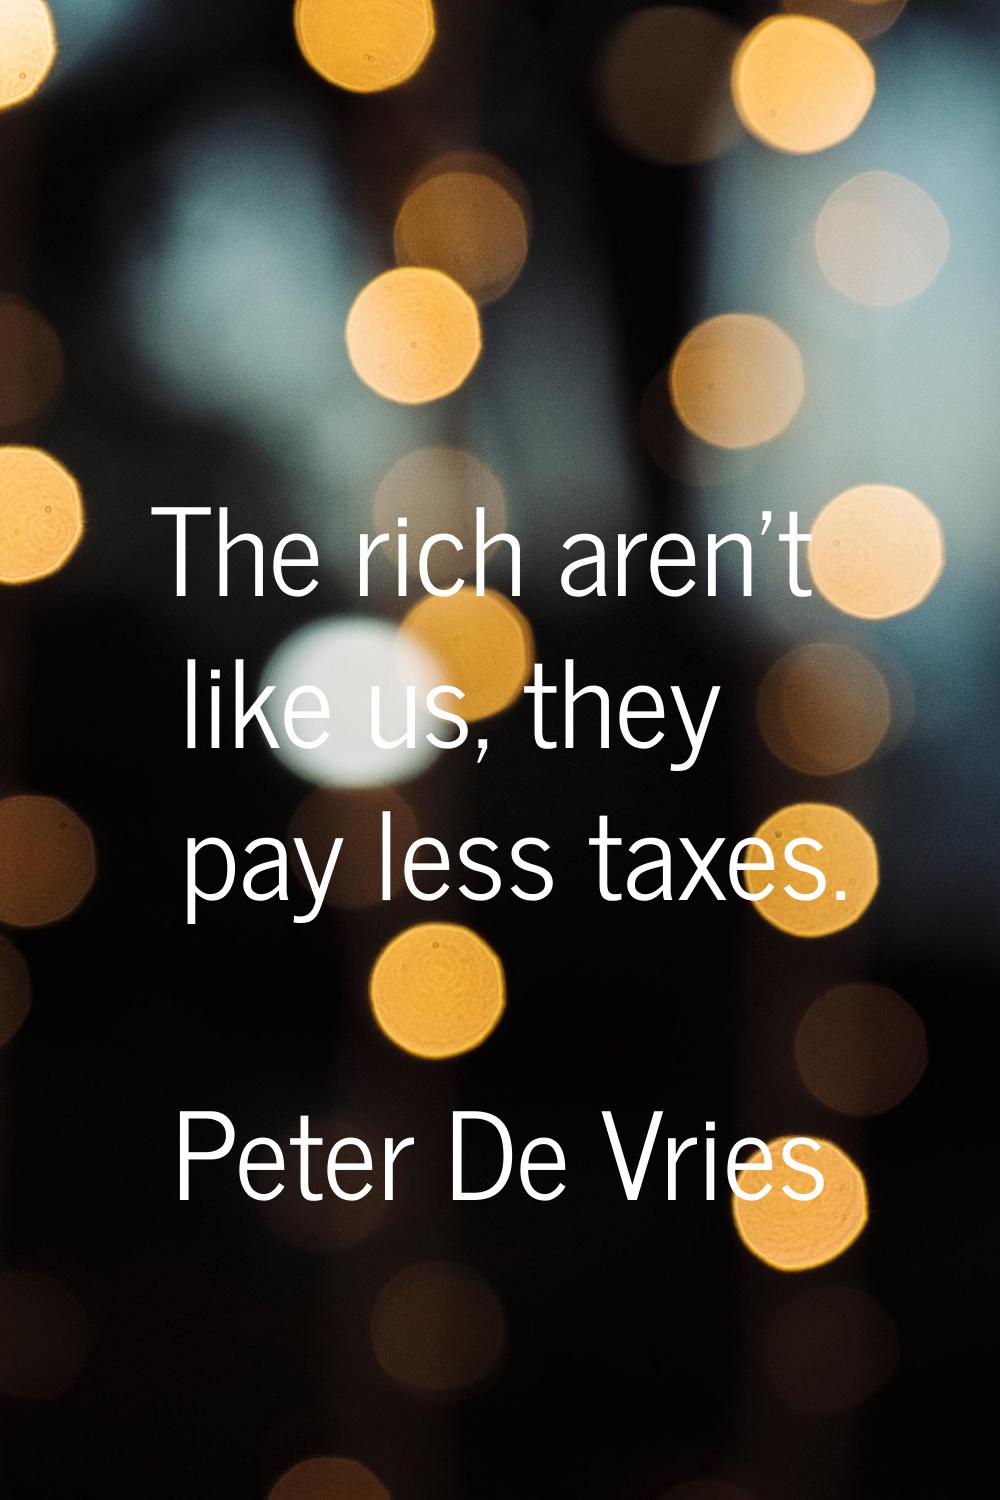 The rich aren't like us, they pay less taxes.